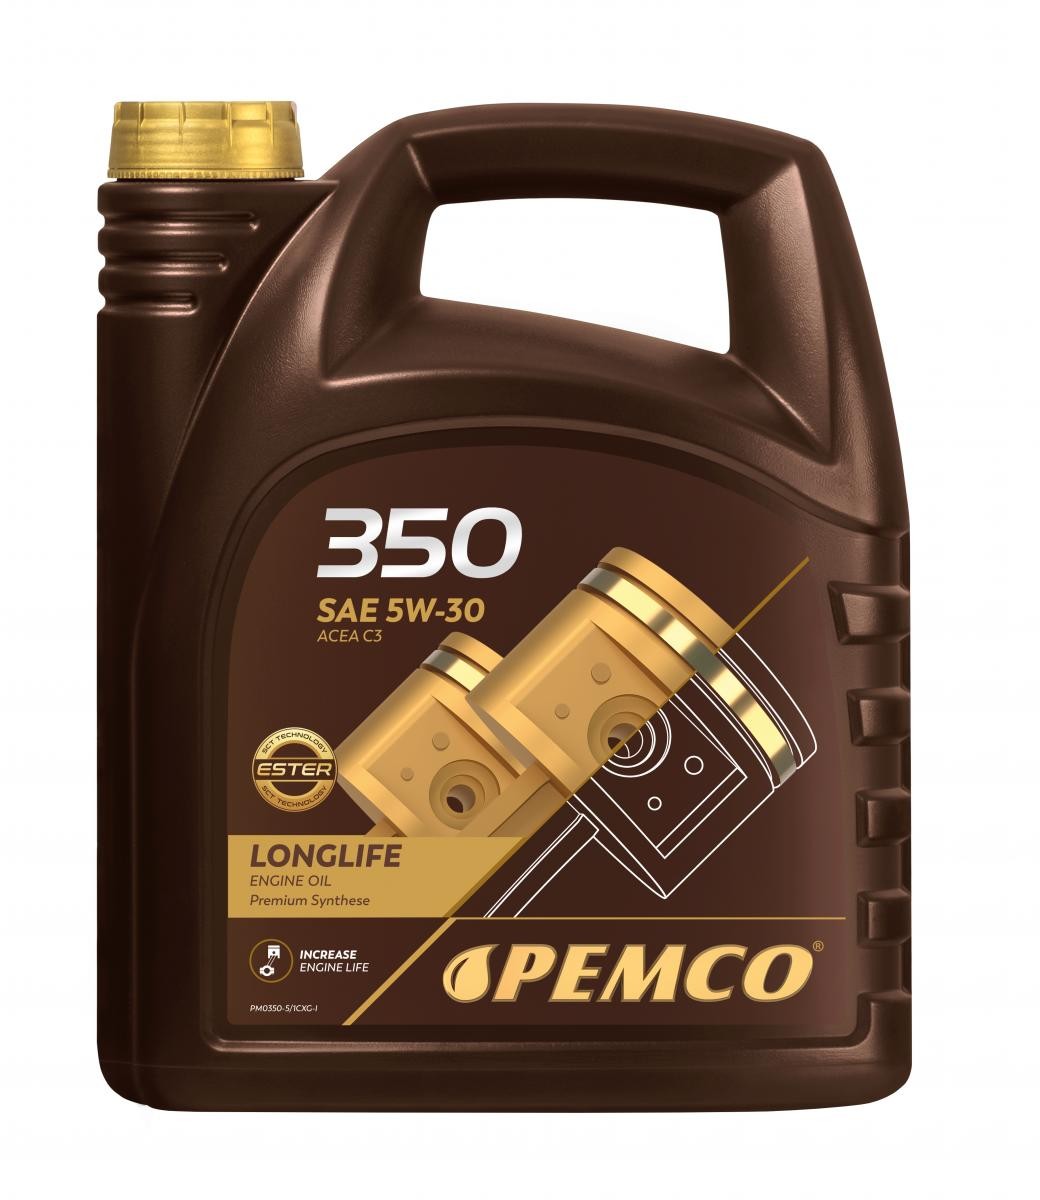 Engine oil PEMCO PM0350-5 Reviews